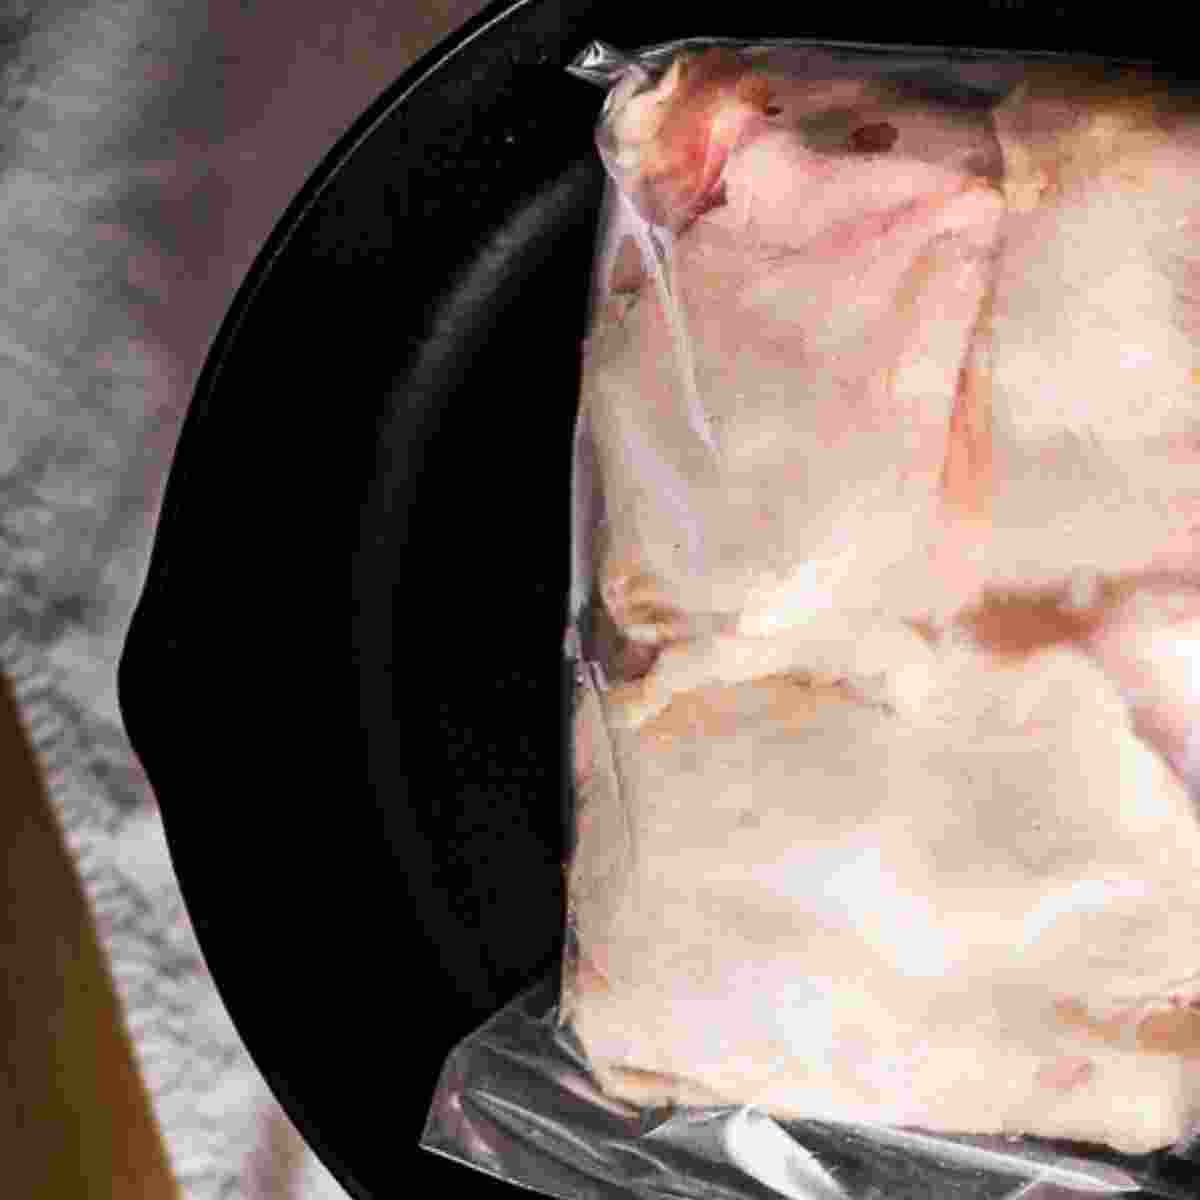 Easy Hack for Thawing Meat